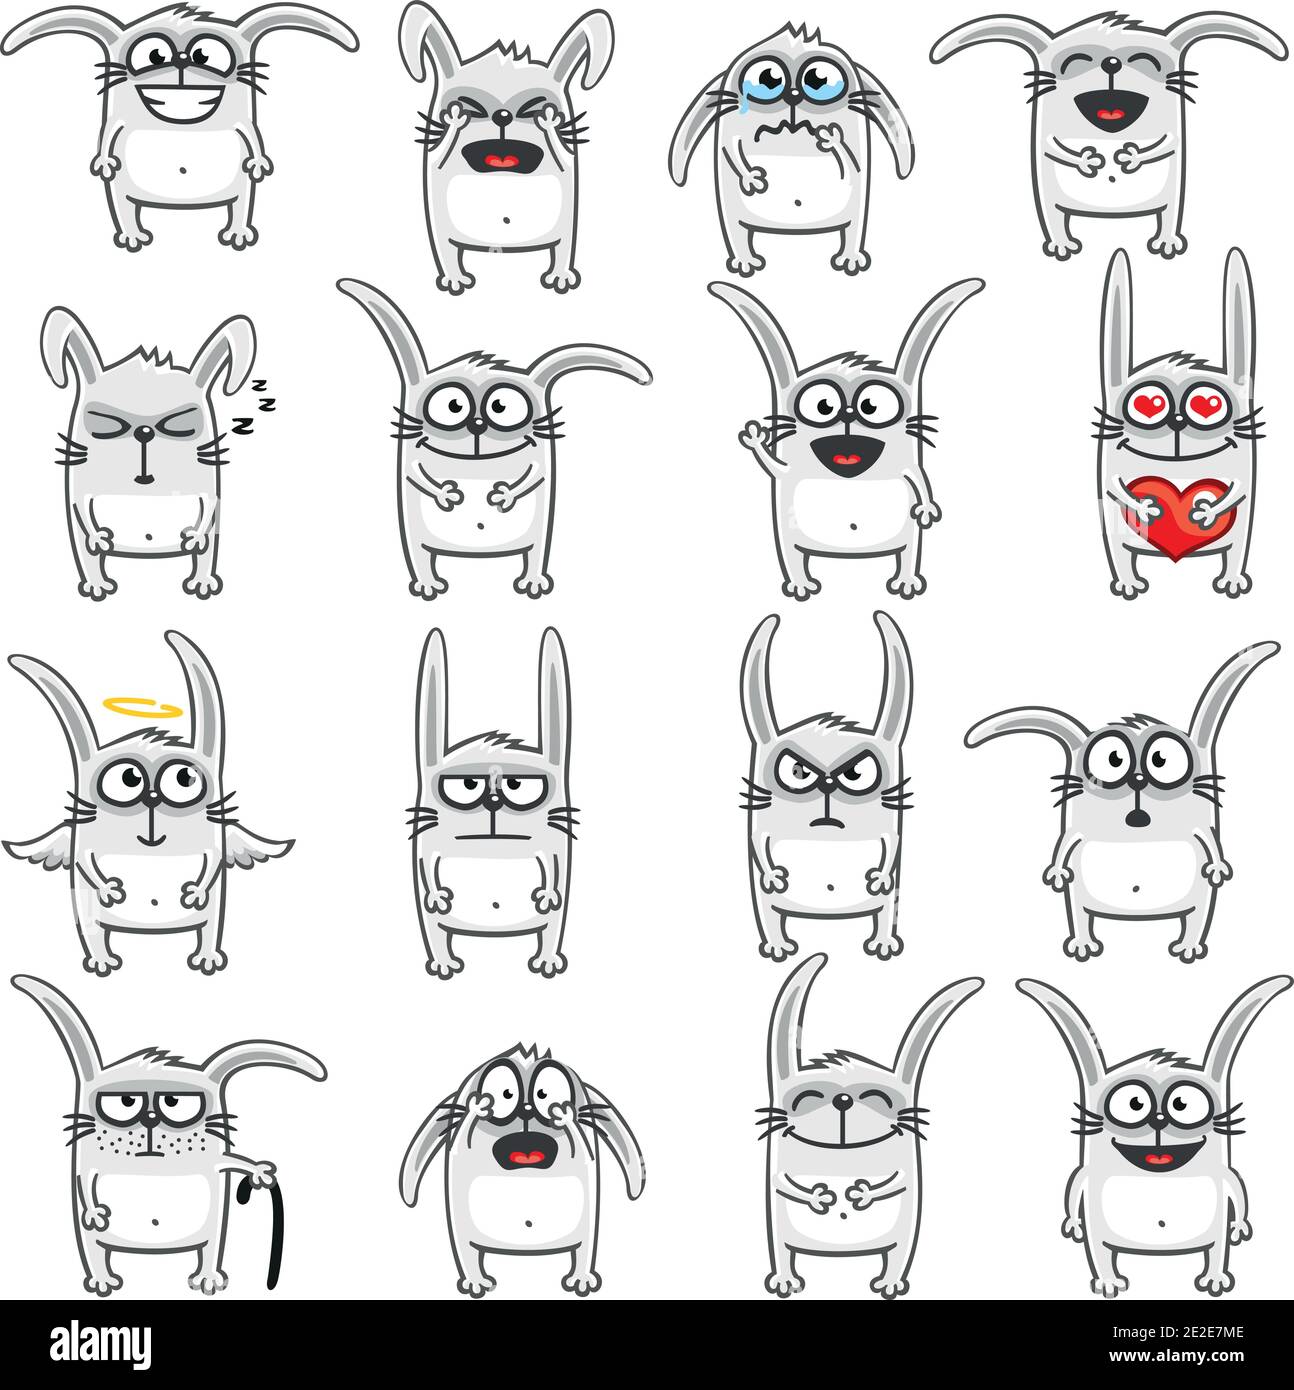 Smiley rabbits individually grouped for easy copy-n-paste. Vector. Stock Vector